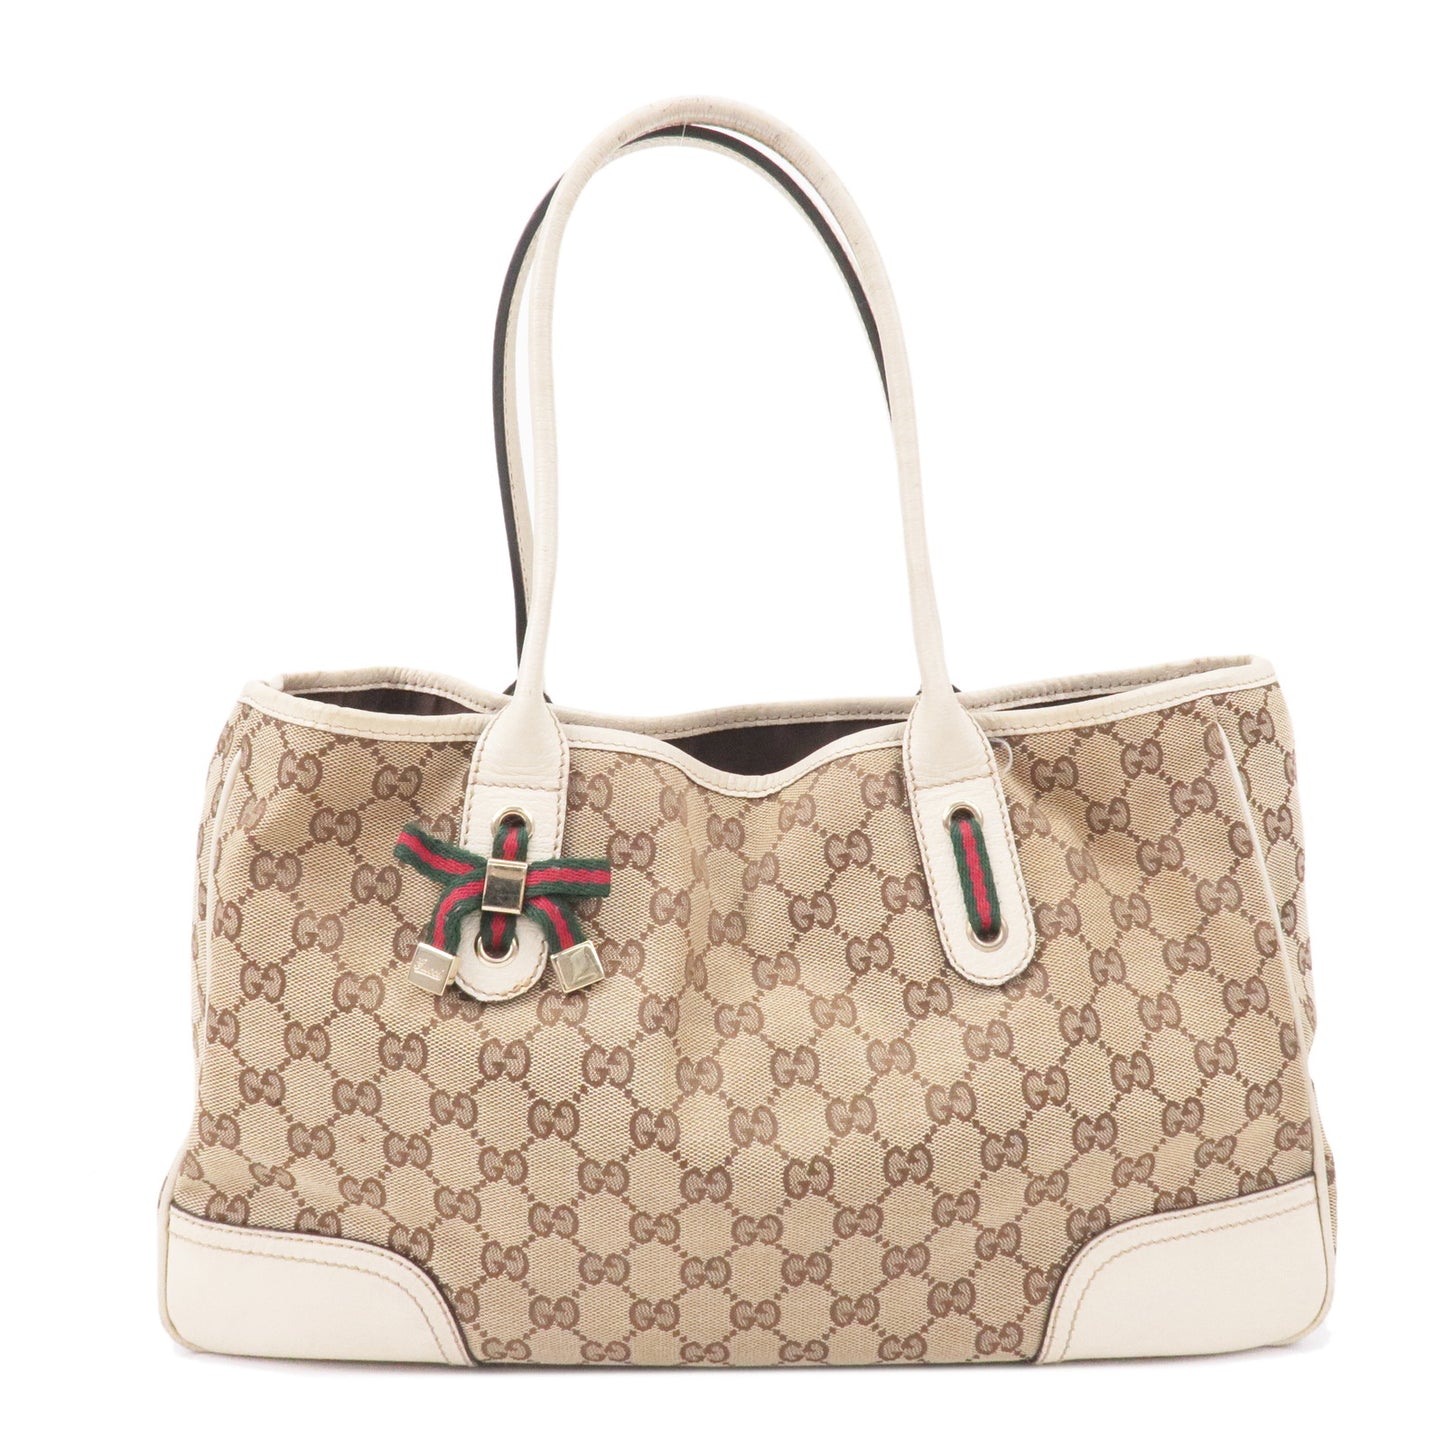 GUCCI Sherry Princy GG Canvas Leather Tote Bag Beige Ivory 163805